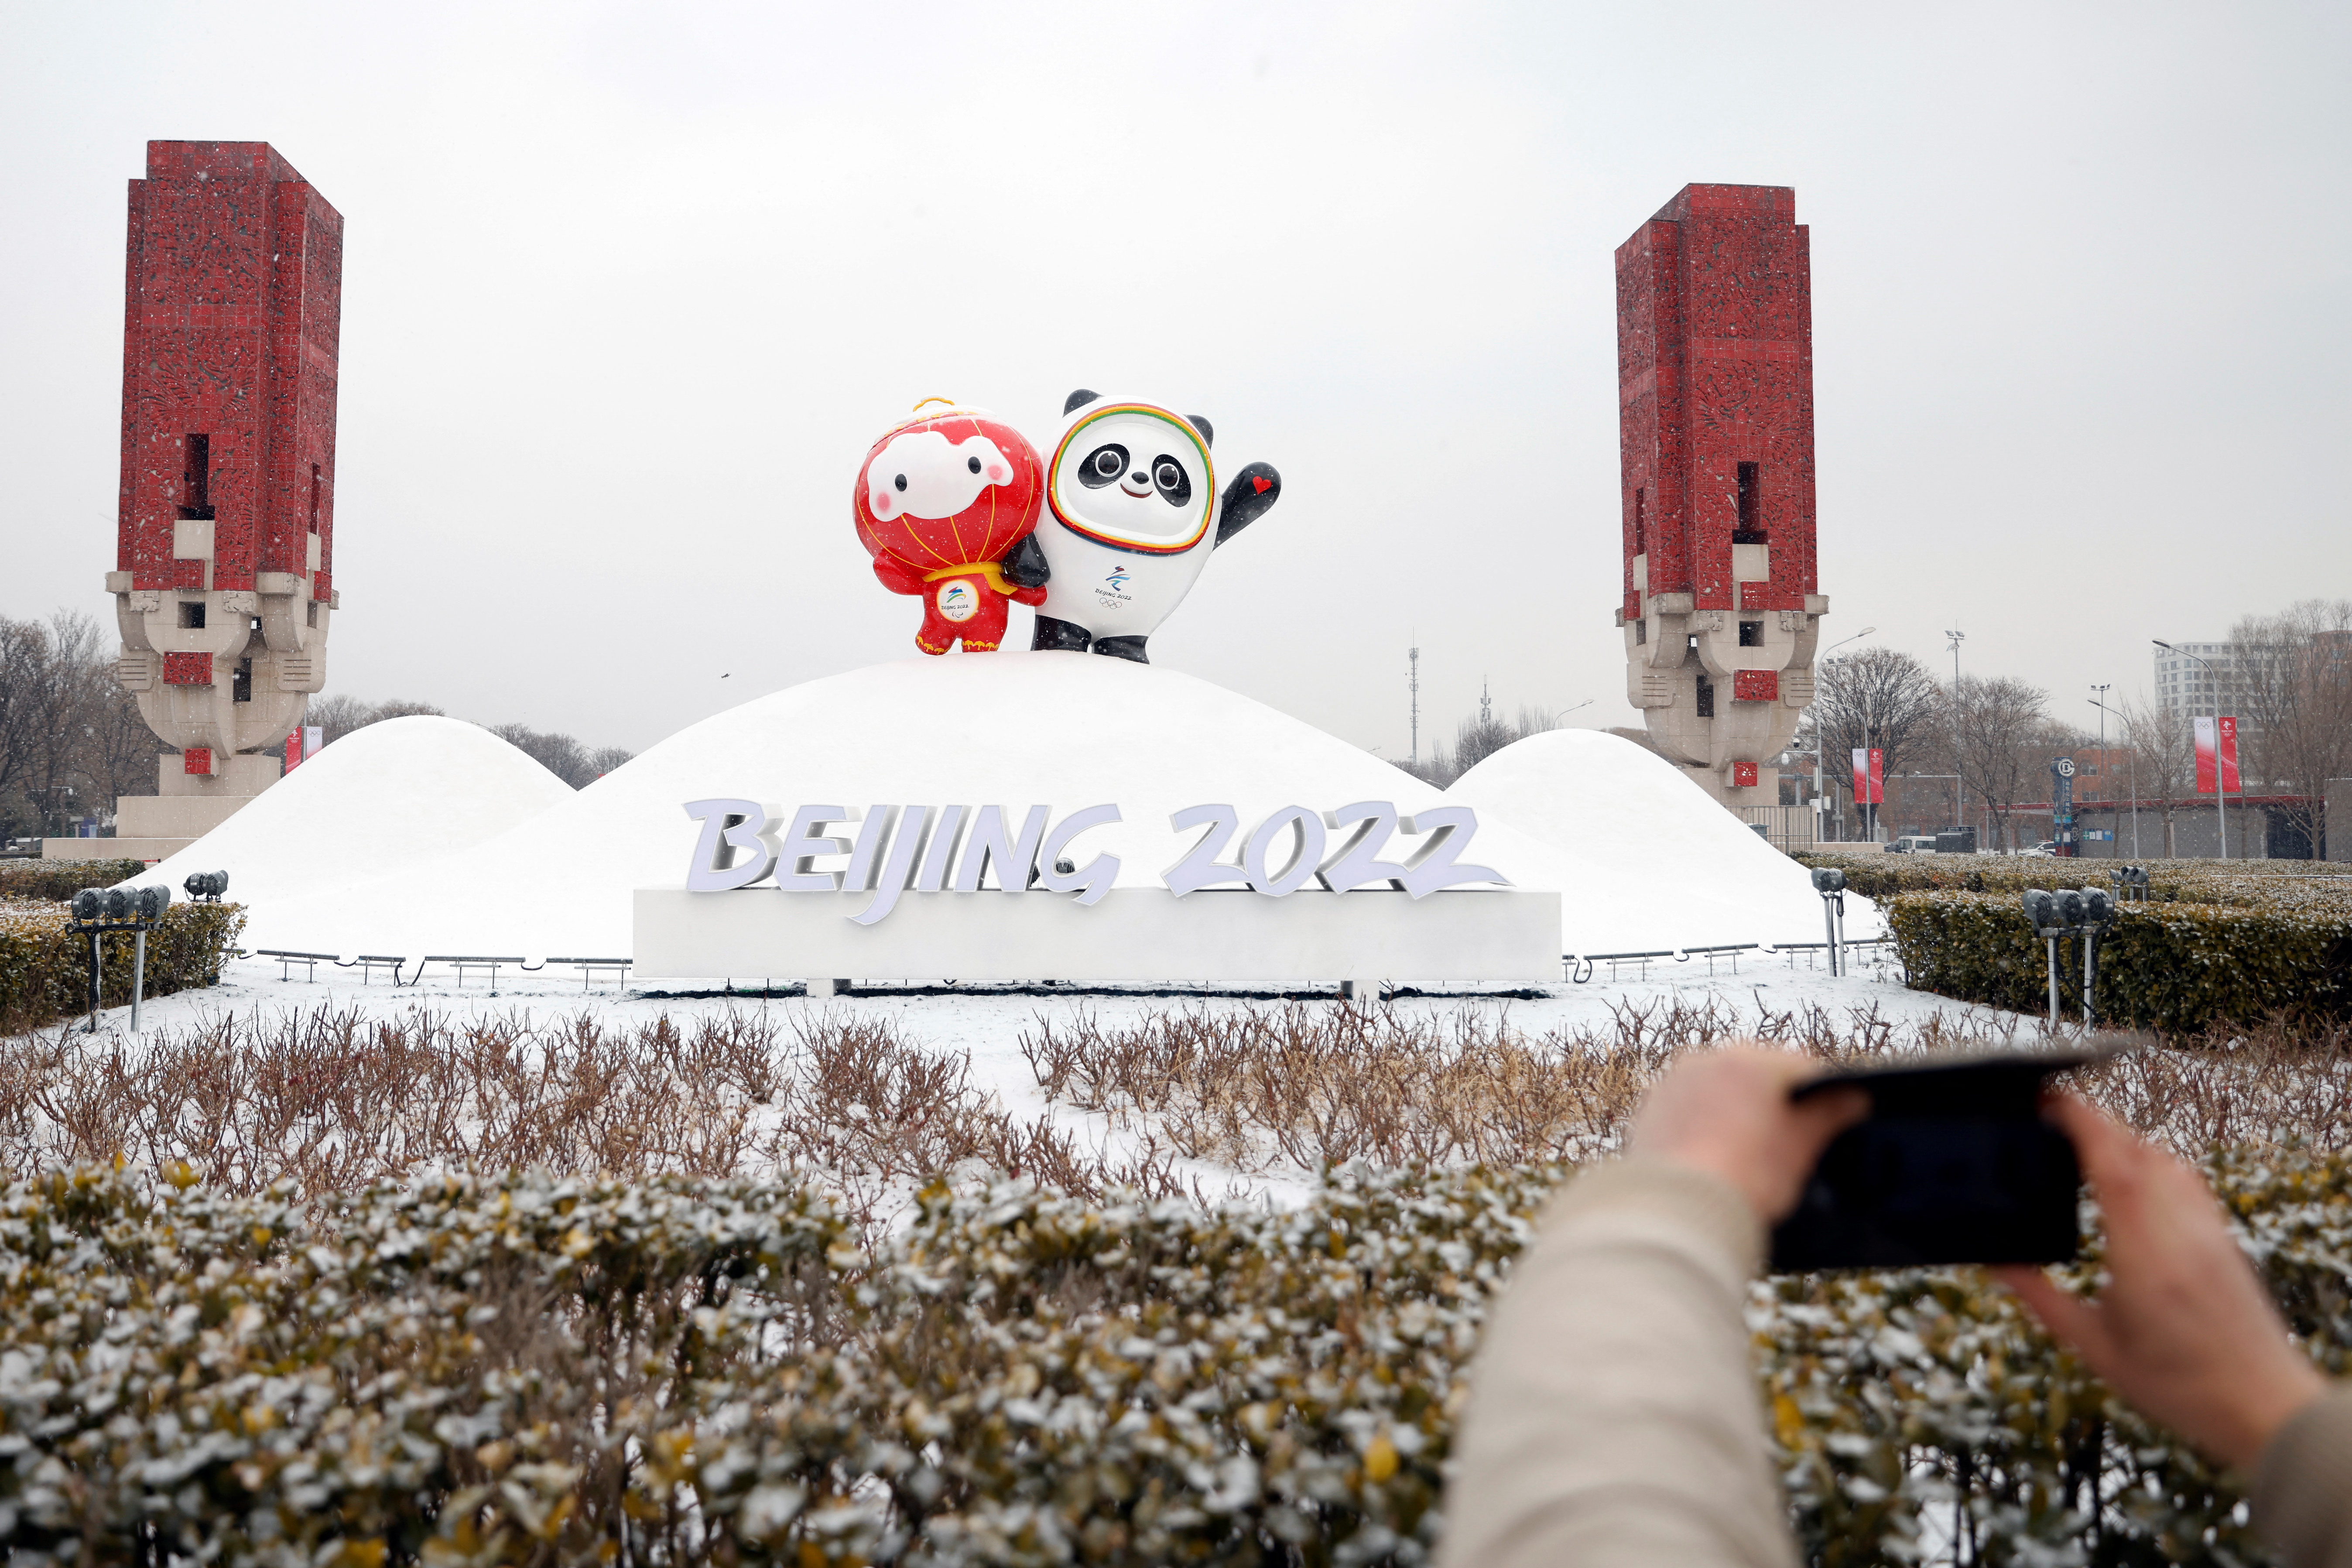 A pedestrian takes pictures of an installation featuring Bing Dwen Dwen and Shuey Rhon Rhon, mascots of the Beijing 2022 Winter Olympics and Paralympics, amid snowfall in Beijing, China January 20, 2022. REUTERS/Carlos Garcia Rawlins